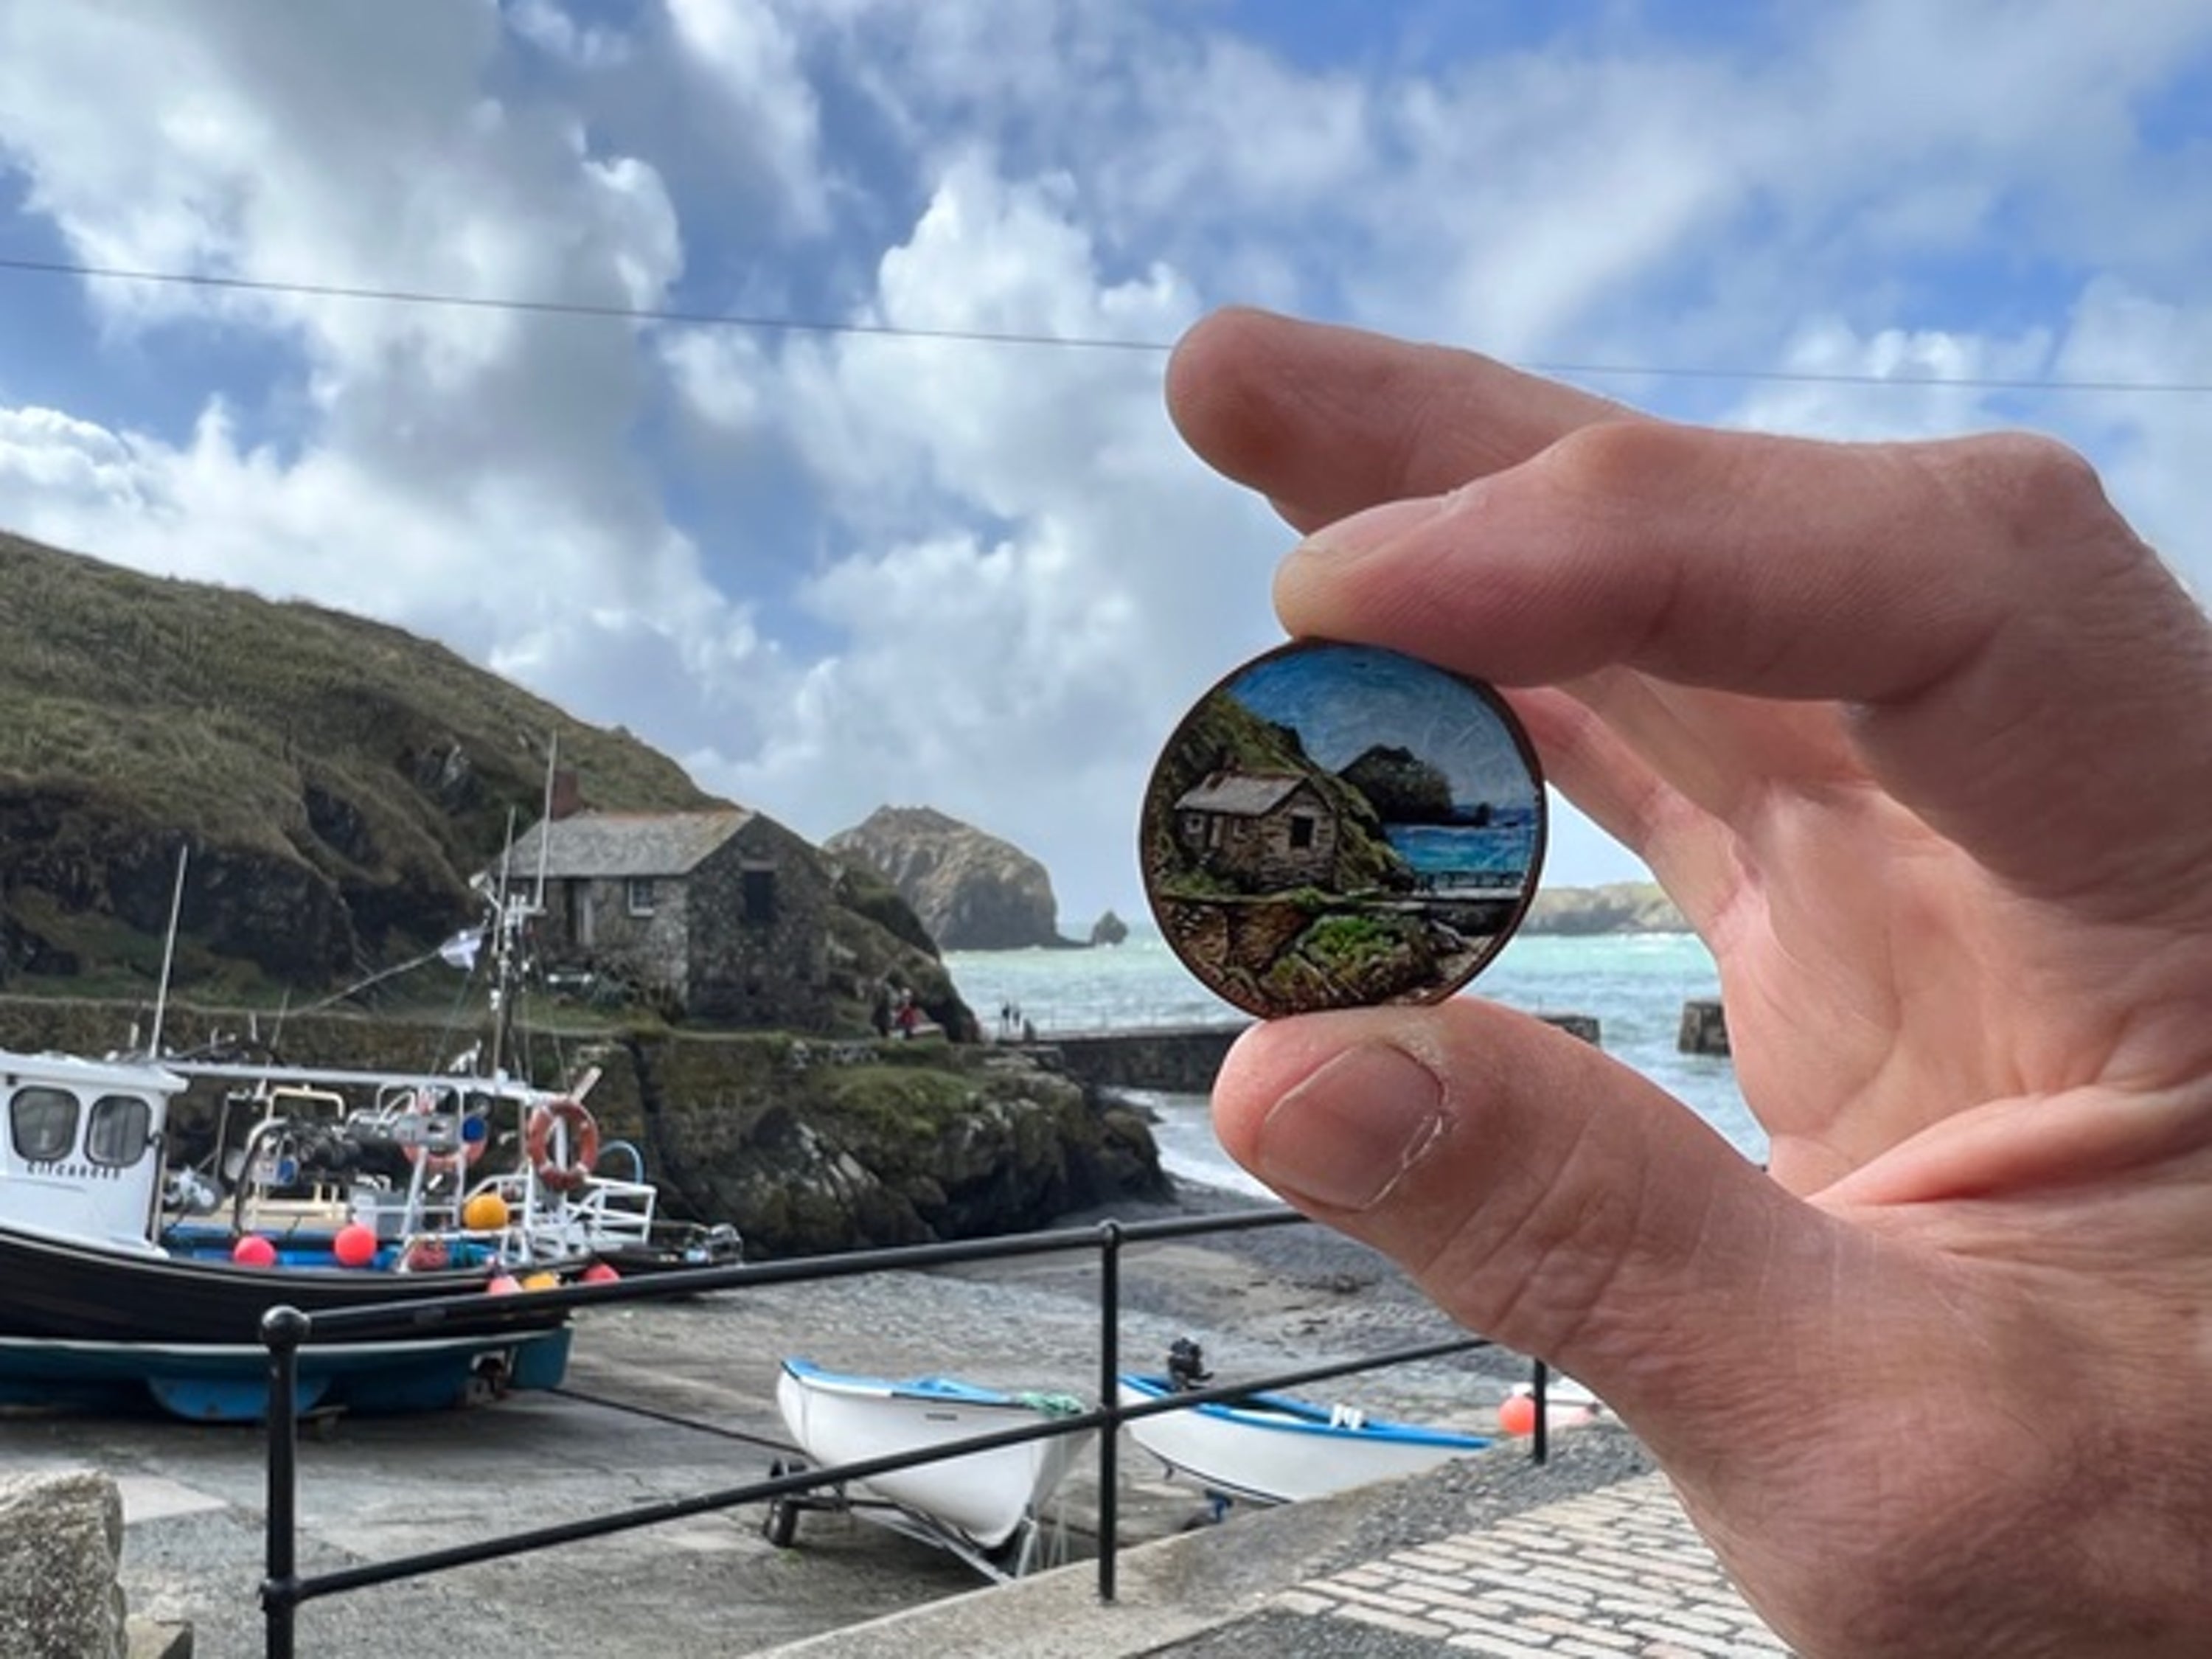 Yvonne Jack painted Mullion Cove on a coin (Yvonne Jack/PA)